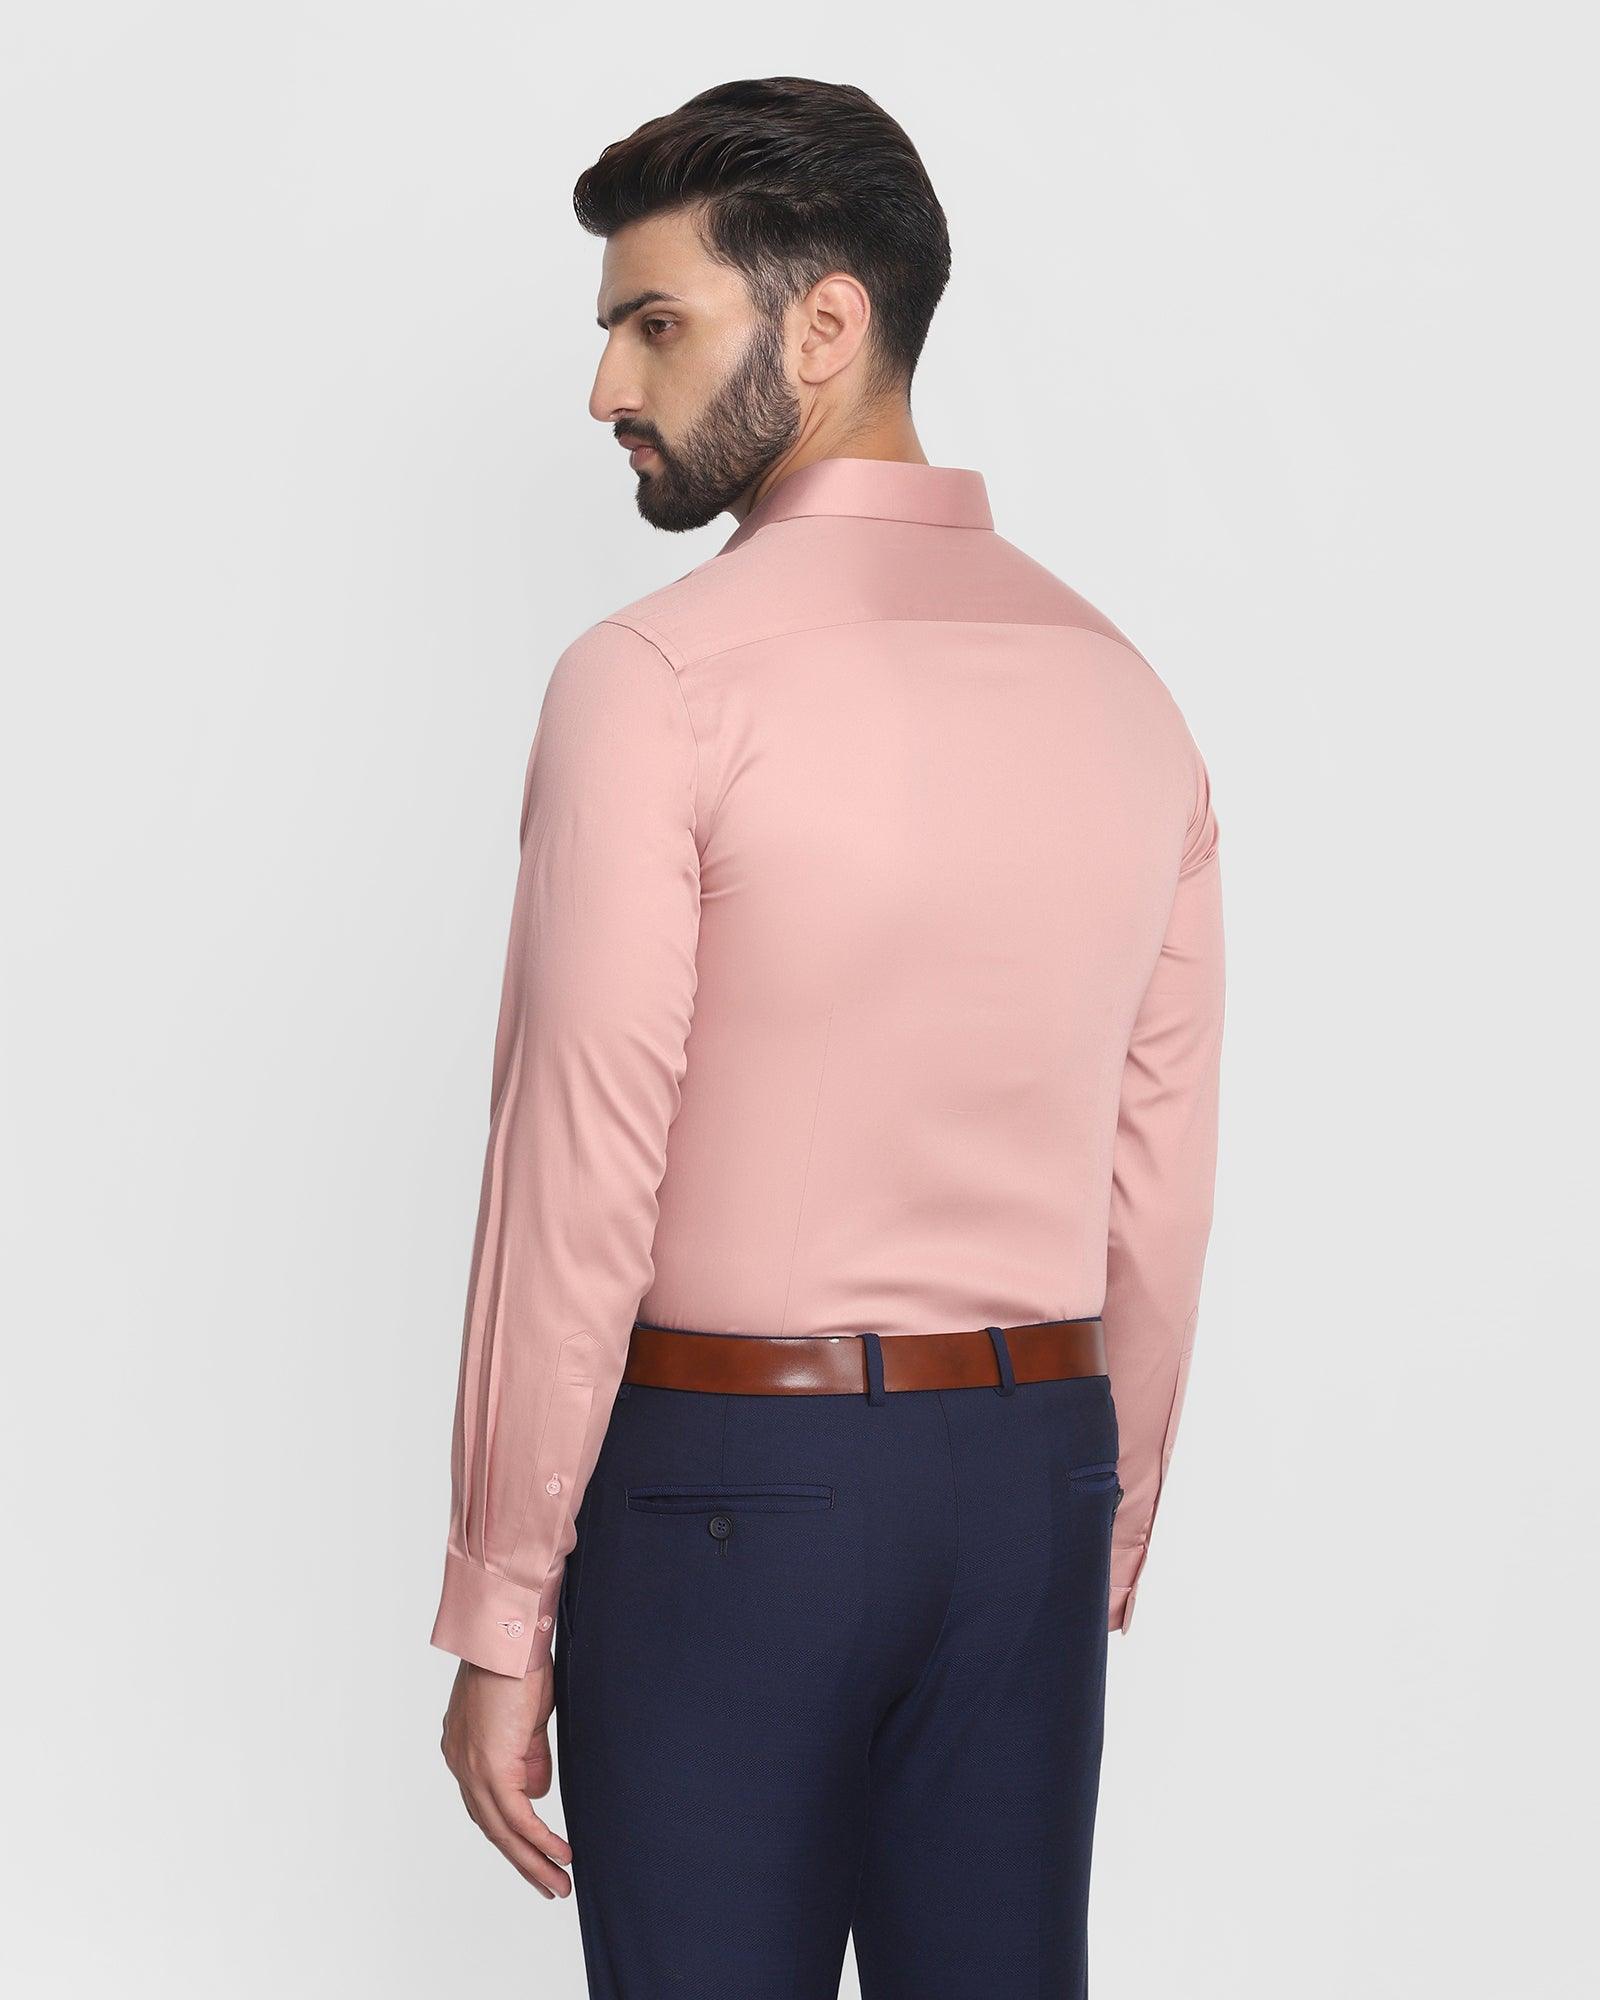 Formal Dusty Pink Solid Shirt - Zylor